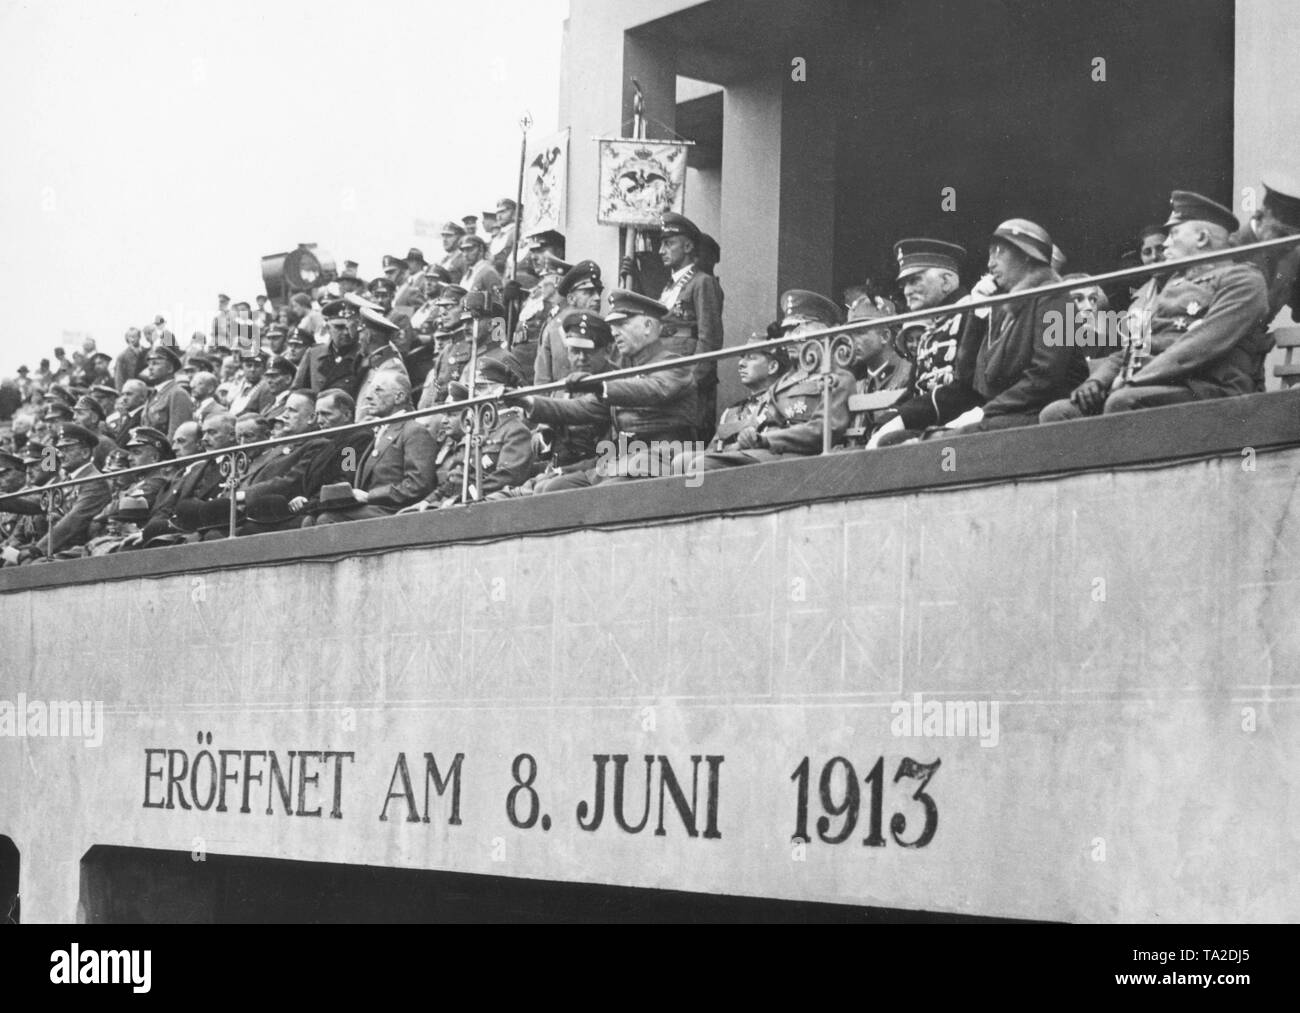 In the VIP box sit prominent figures, including the leaders of the Stahlhelm Theodor Duesterberg (in the middle, hands on the parapet) and Franz Seldte (left beside him), and on the left the representatives of the Reich government, such as the Reich Interior Minister (with cigarette, glasses and hat in the lap). On the right, Generalfeldmarschall August von Mackensen (black uniform). On the grandstand the inscription: 'Opened on June 8, 1913'. Stock Photo